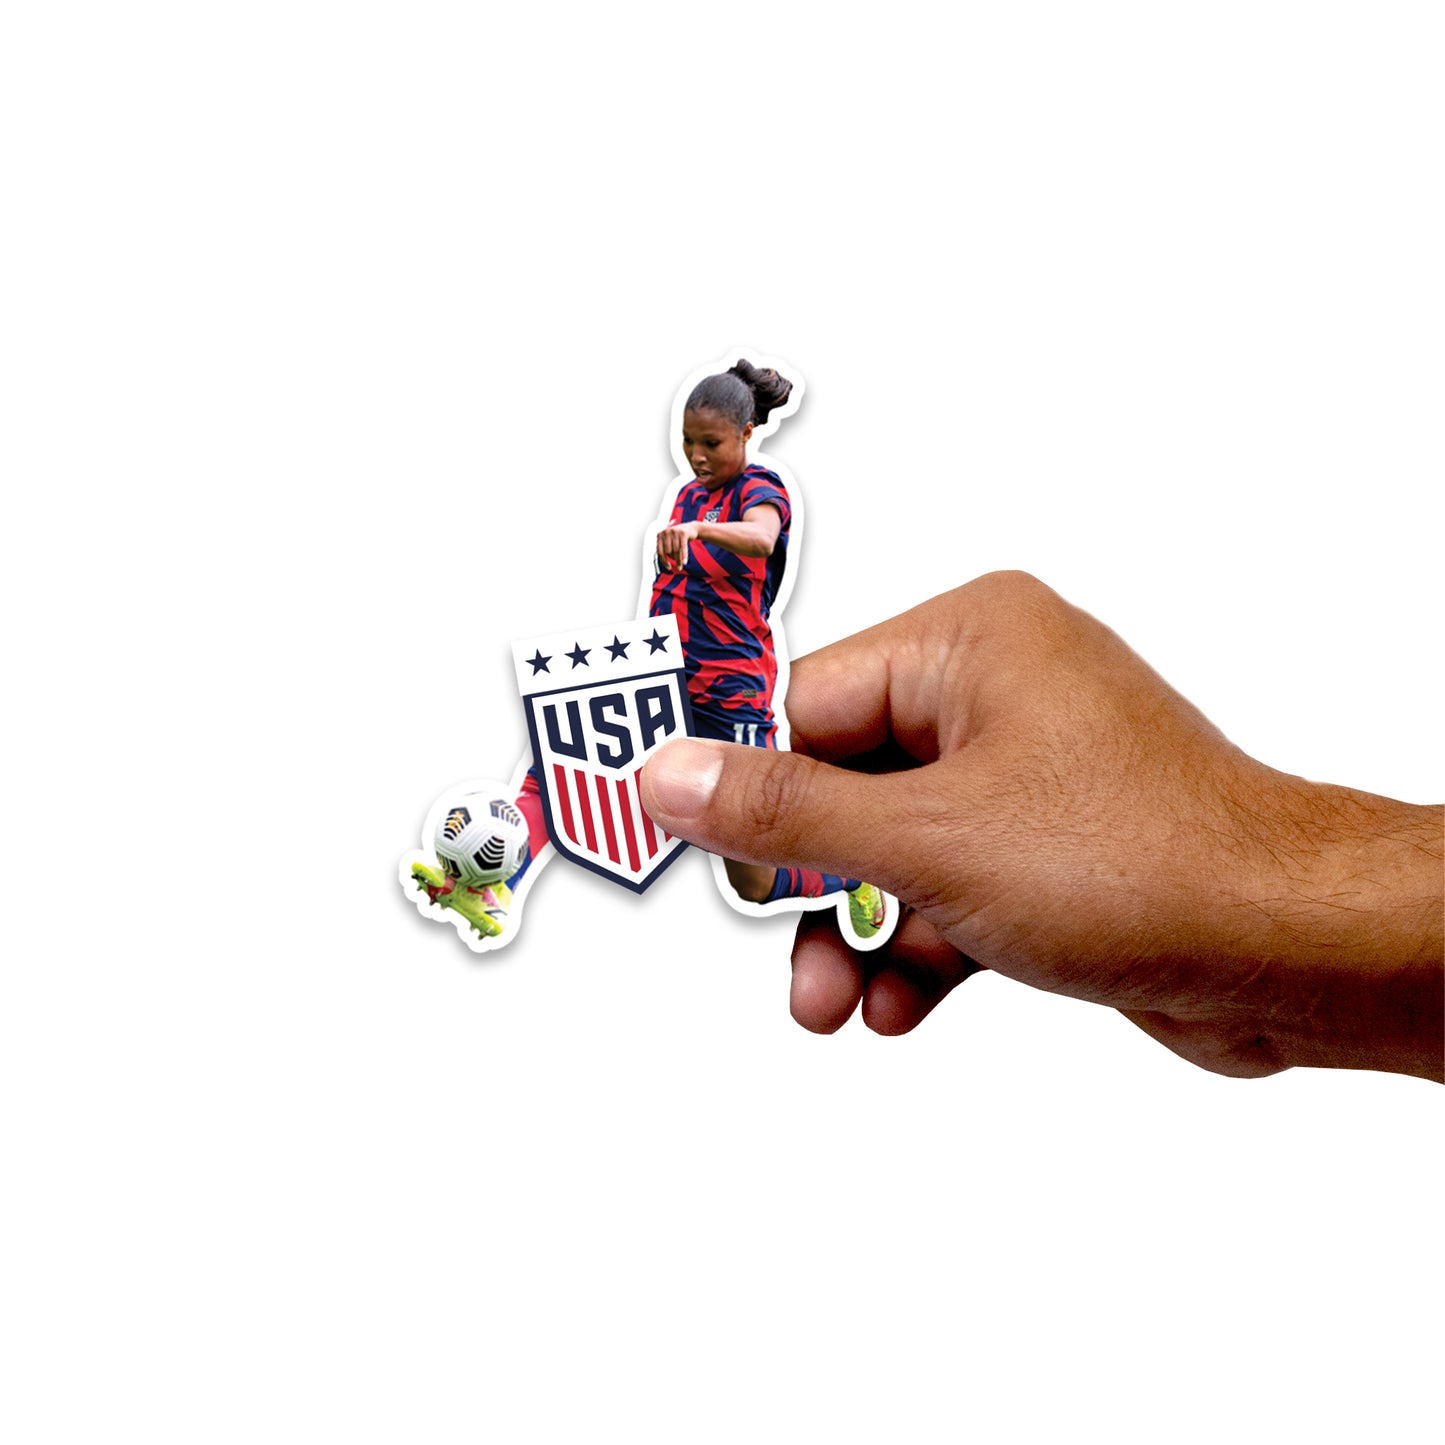 Sheet of 5 -Midge Purce Player Minis        - Officially Licensed USWNT Removable     Adhesive Decal